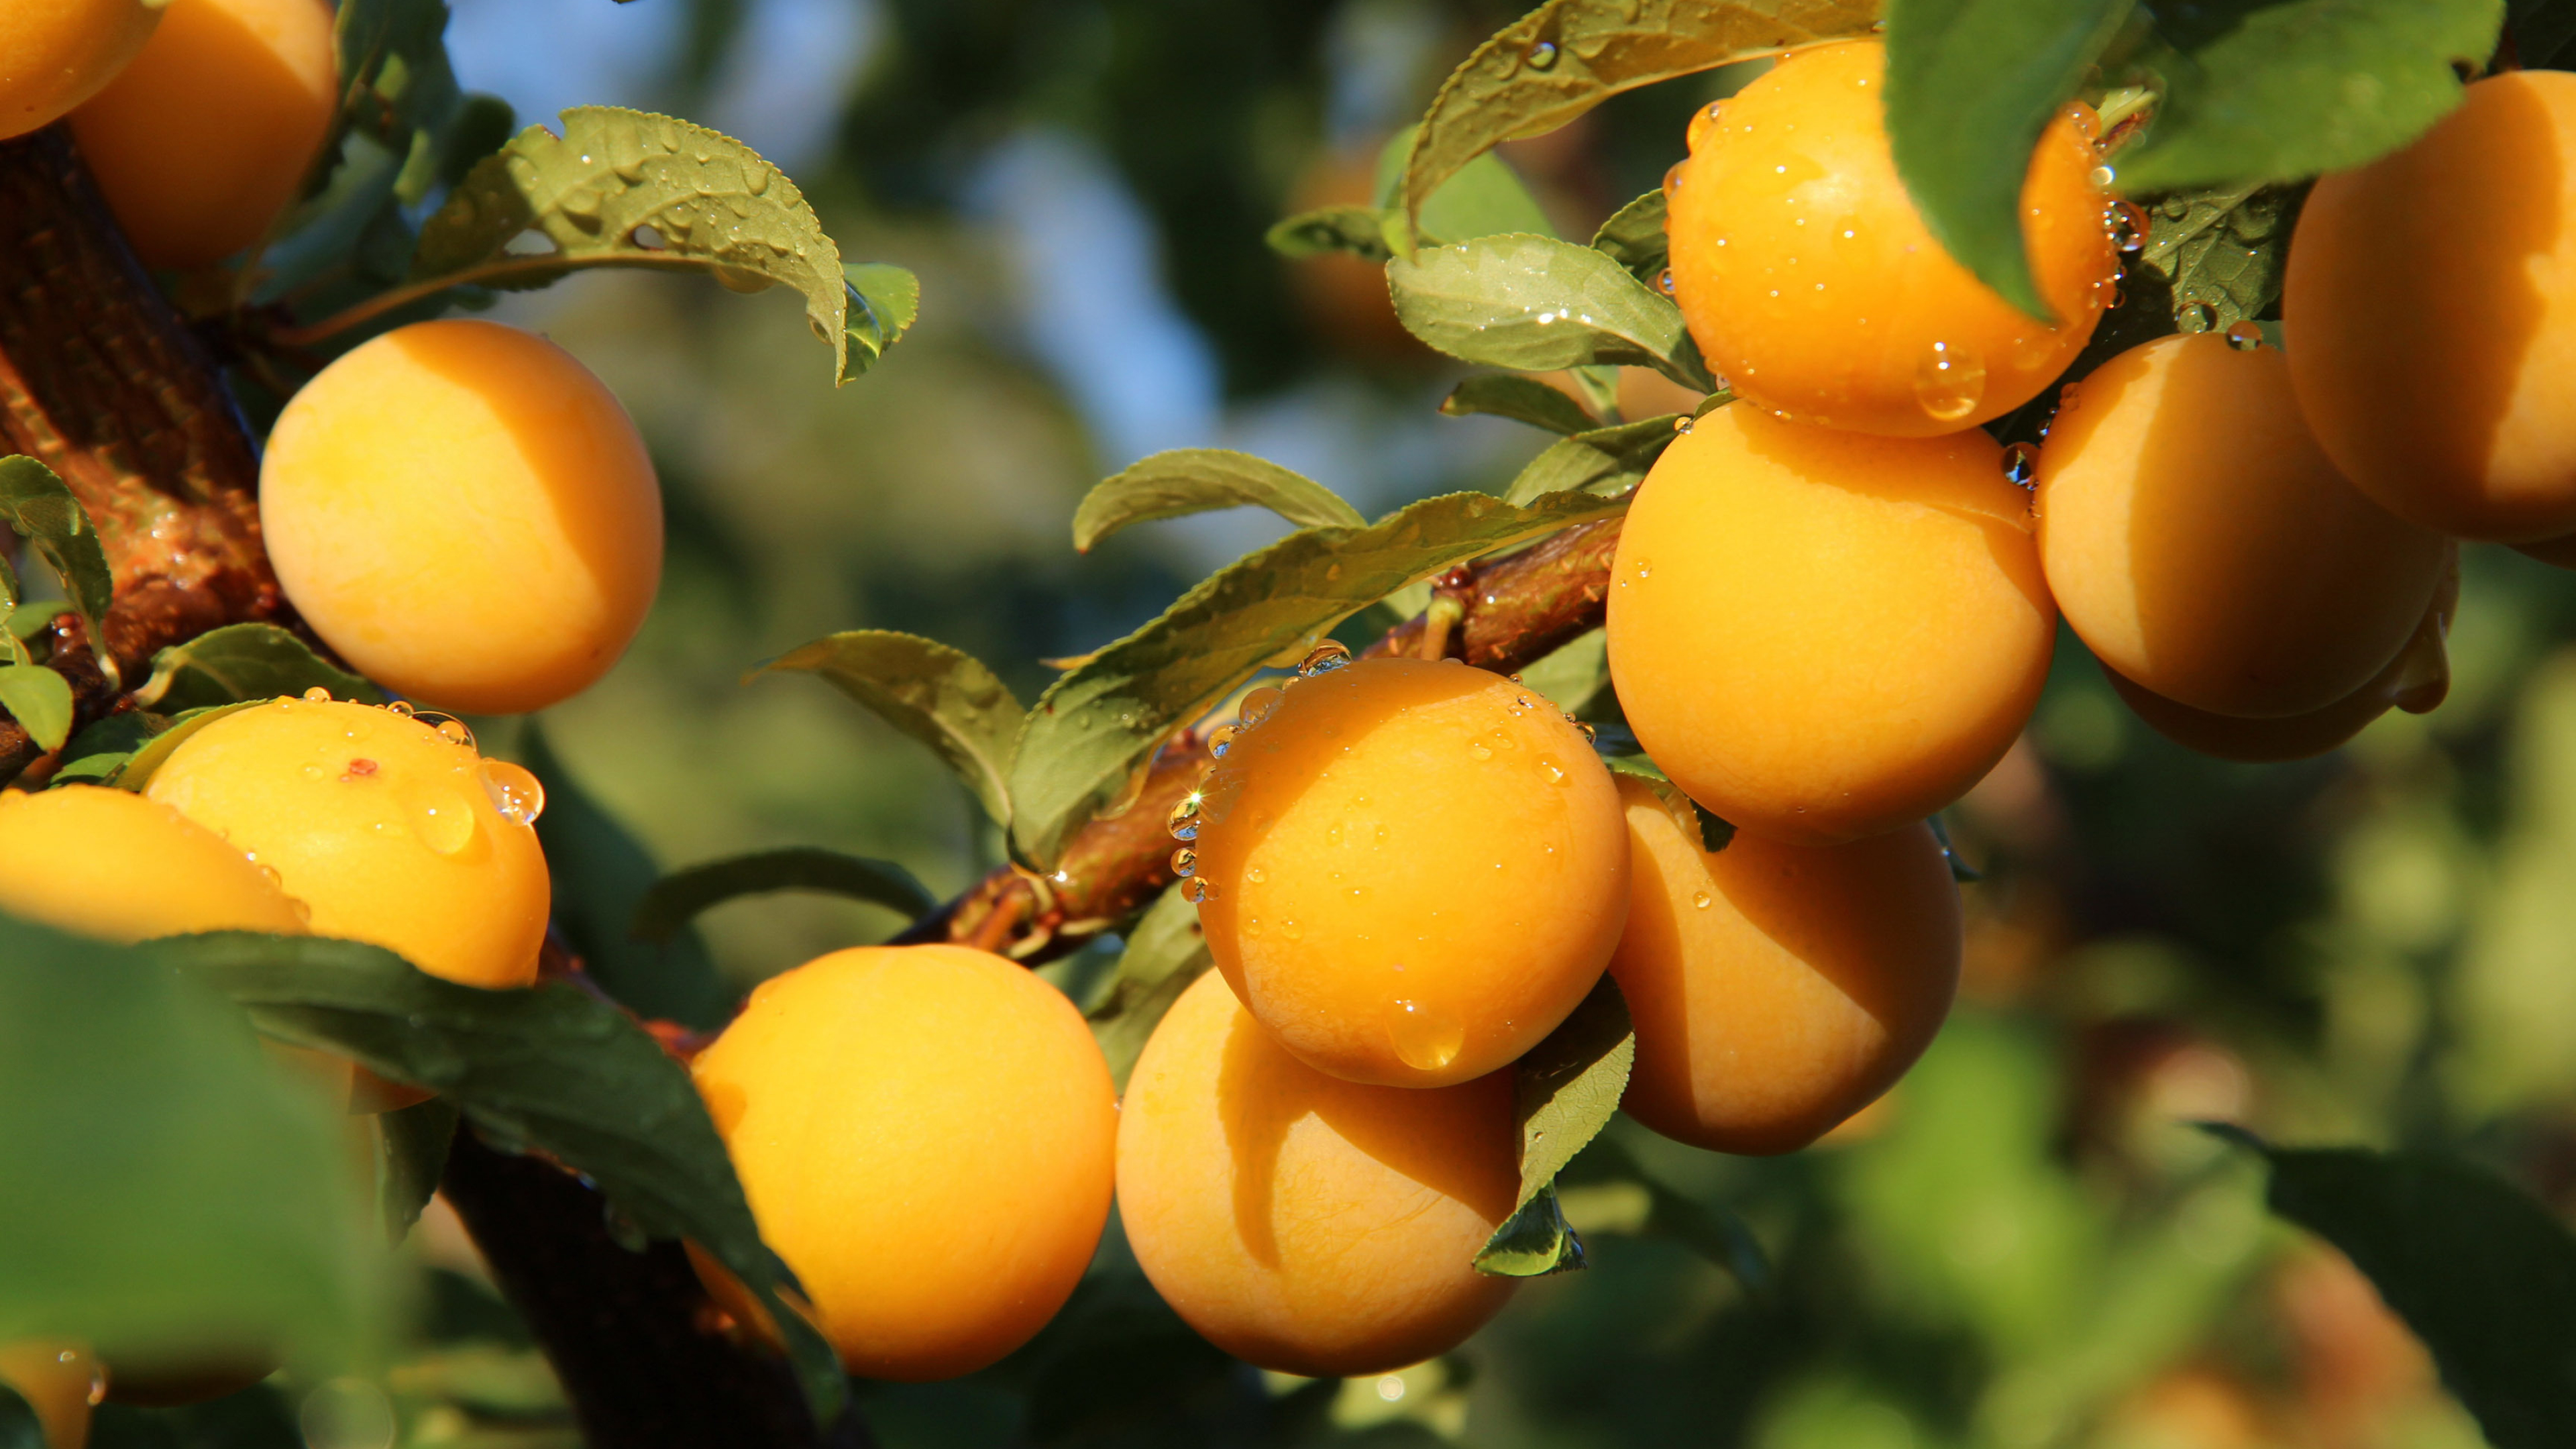 Apricots in a tree wallpaper, Nature's artwork, Bountiful harvest, Serene and peaceful, 3840x2160 4K Desktop